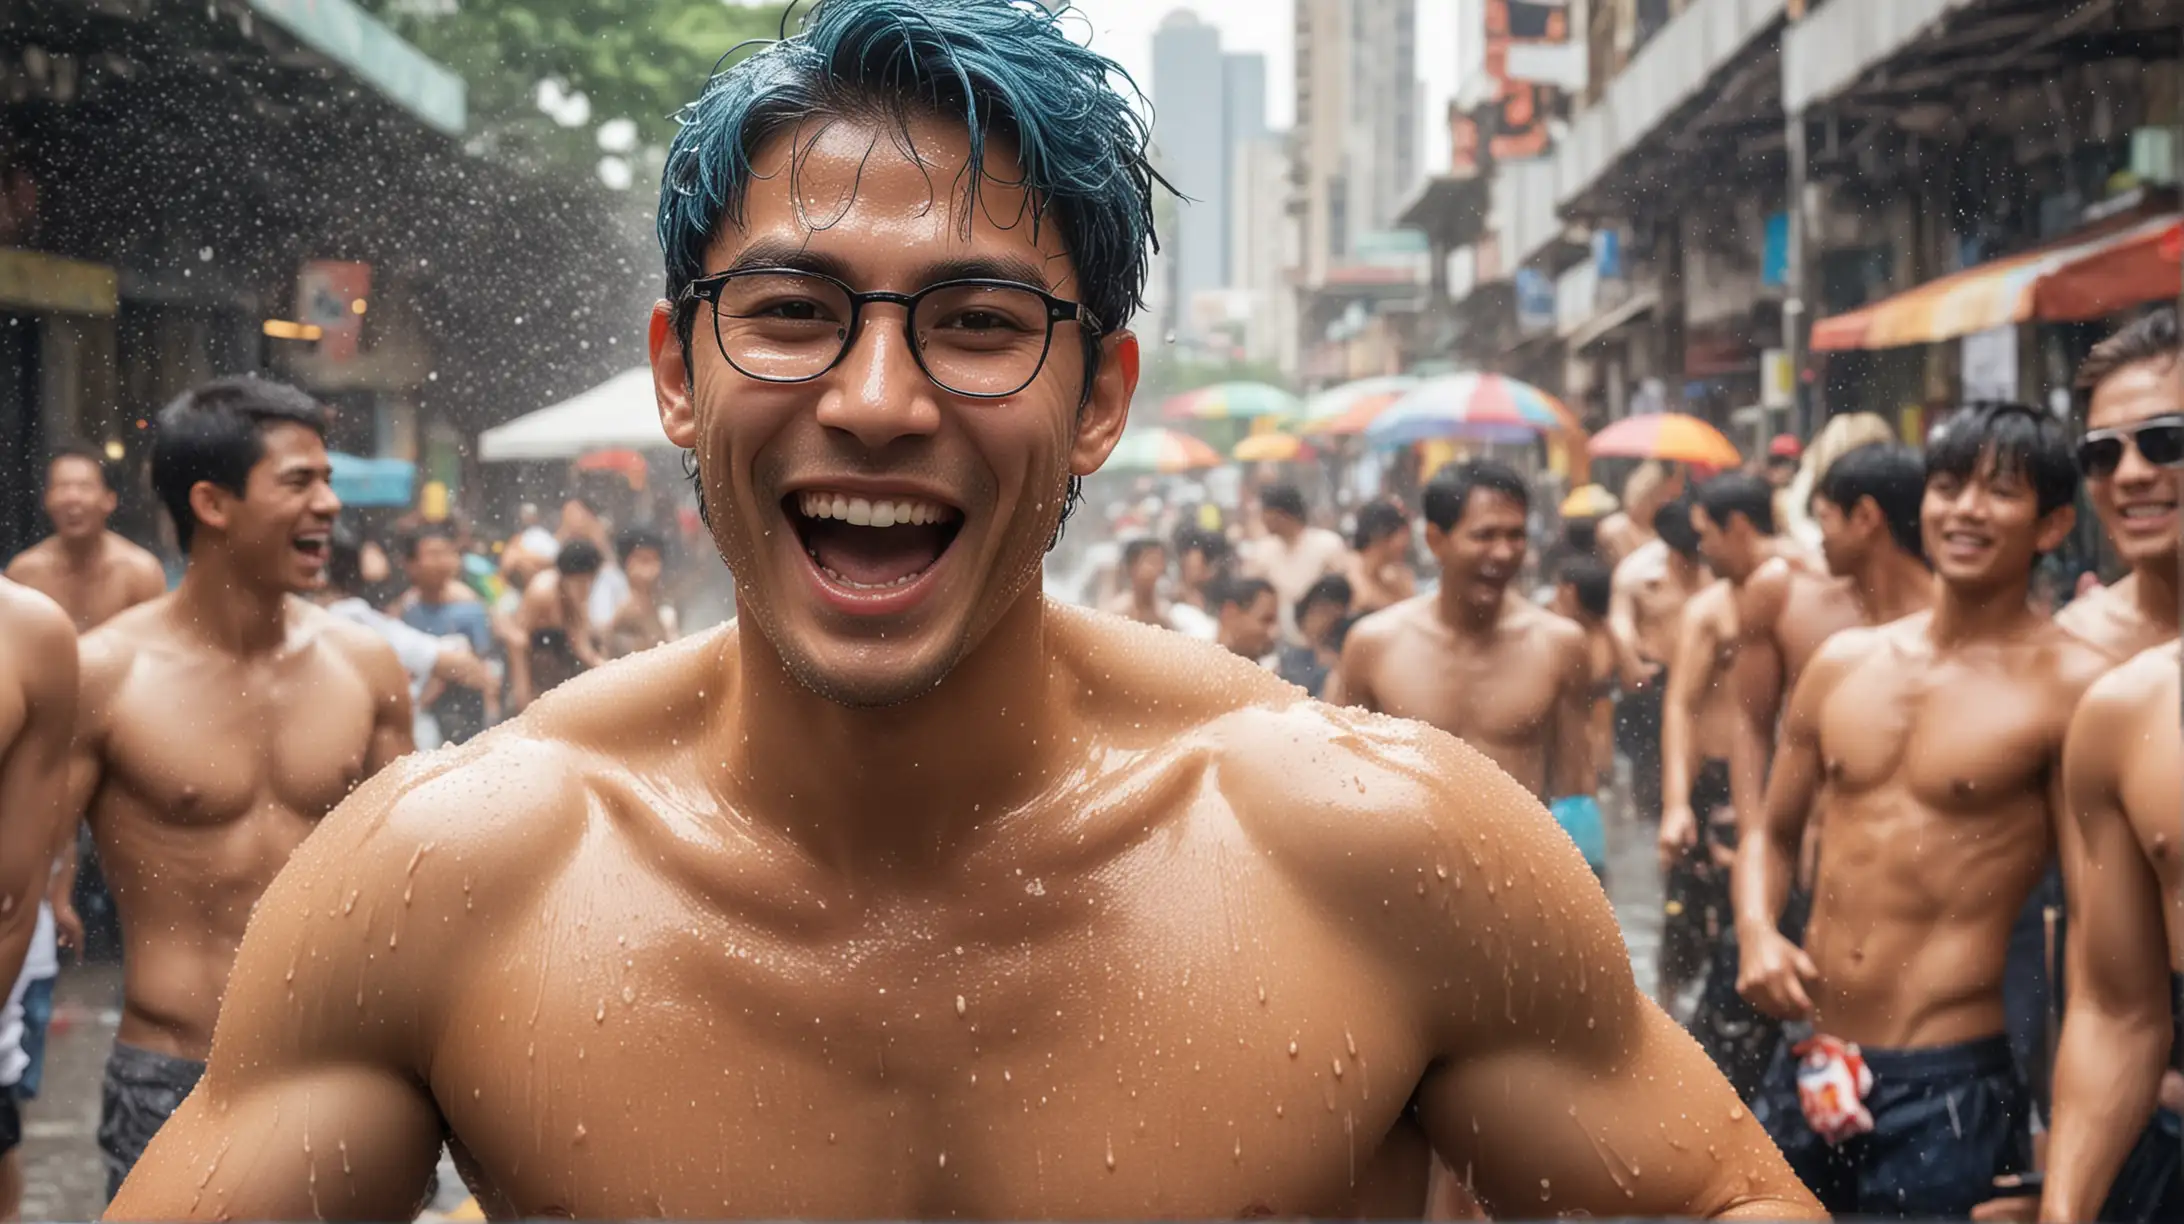 AI drawing prompt: glasses wearing android hunk Lancelot is having a great time in Songkran festival. His aquamarine eyes sparkling, short navy blue hair damped, shirtless body glistening as all the hot gay men around him are shooting water against each other on the streets of Bangkok.

Lancelot's shirtless physique glistens under the sunlight, his muscular frame highlighted by the droplets of water clinging to his skin. With a water gun in hand, he joins in the playful chaos, engaging in spirited water fights with the other festival-goers.All around him, Thai hunks laugh and shout as they drench each other with water, their faces lit up with joy and camaraderie. The streets are alive with the sounds of splashing water and cheerful banter, creating a vibrant and energetic atmosphere.